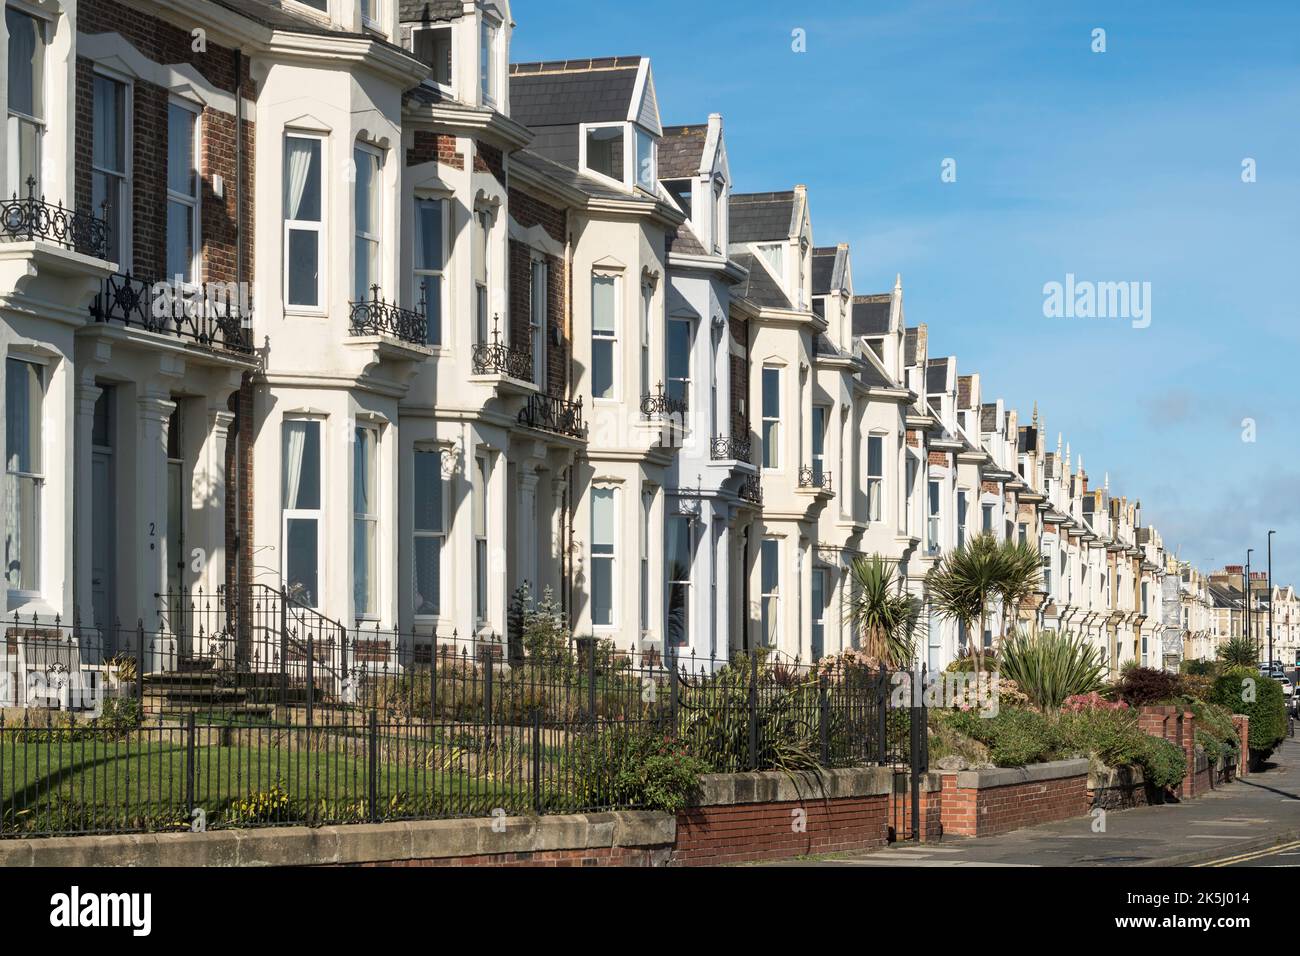 Beverley Terrace a row of seafront terraced Victorian houses in Cullercoats, Tyne and Wear, England, UK Stock Photo